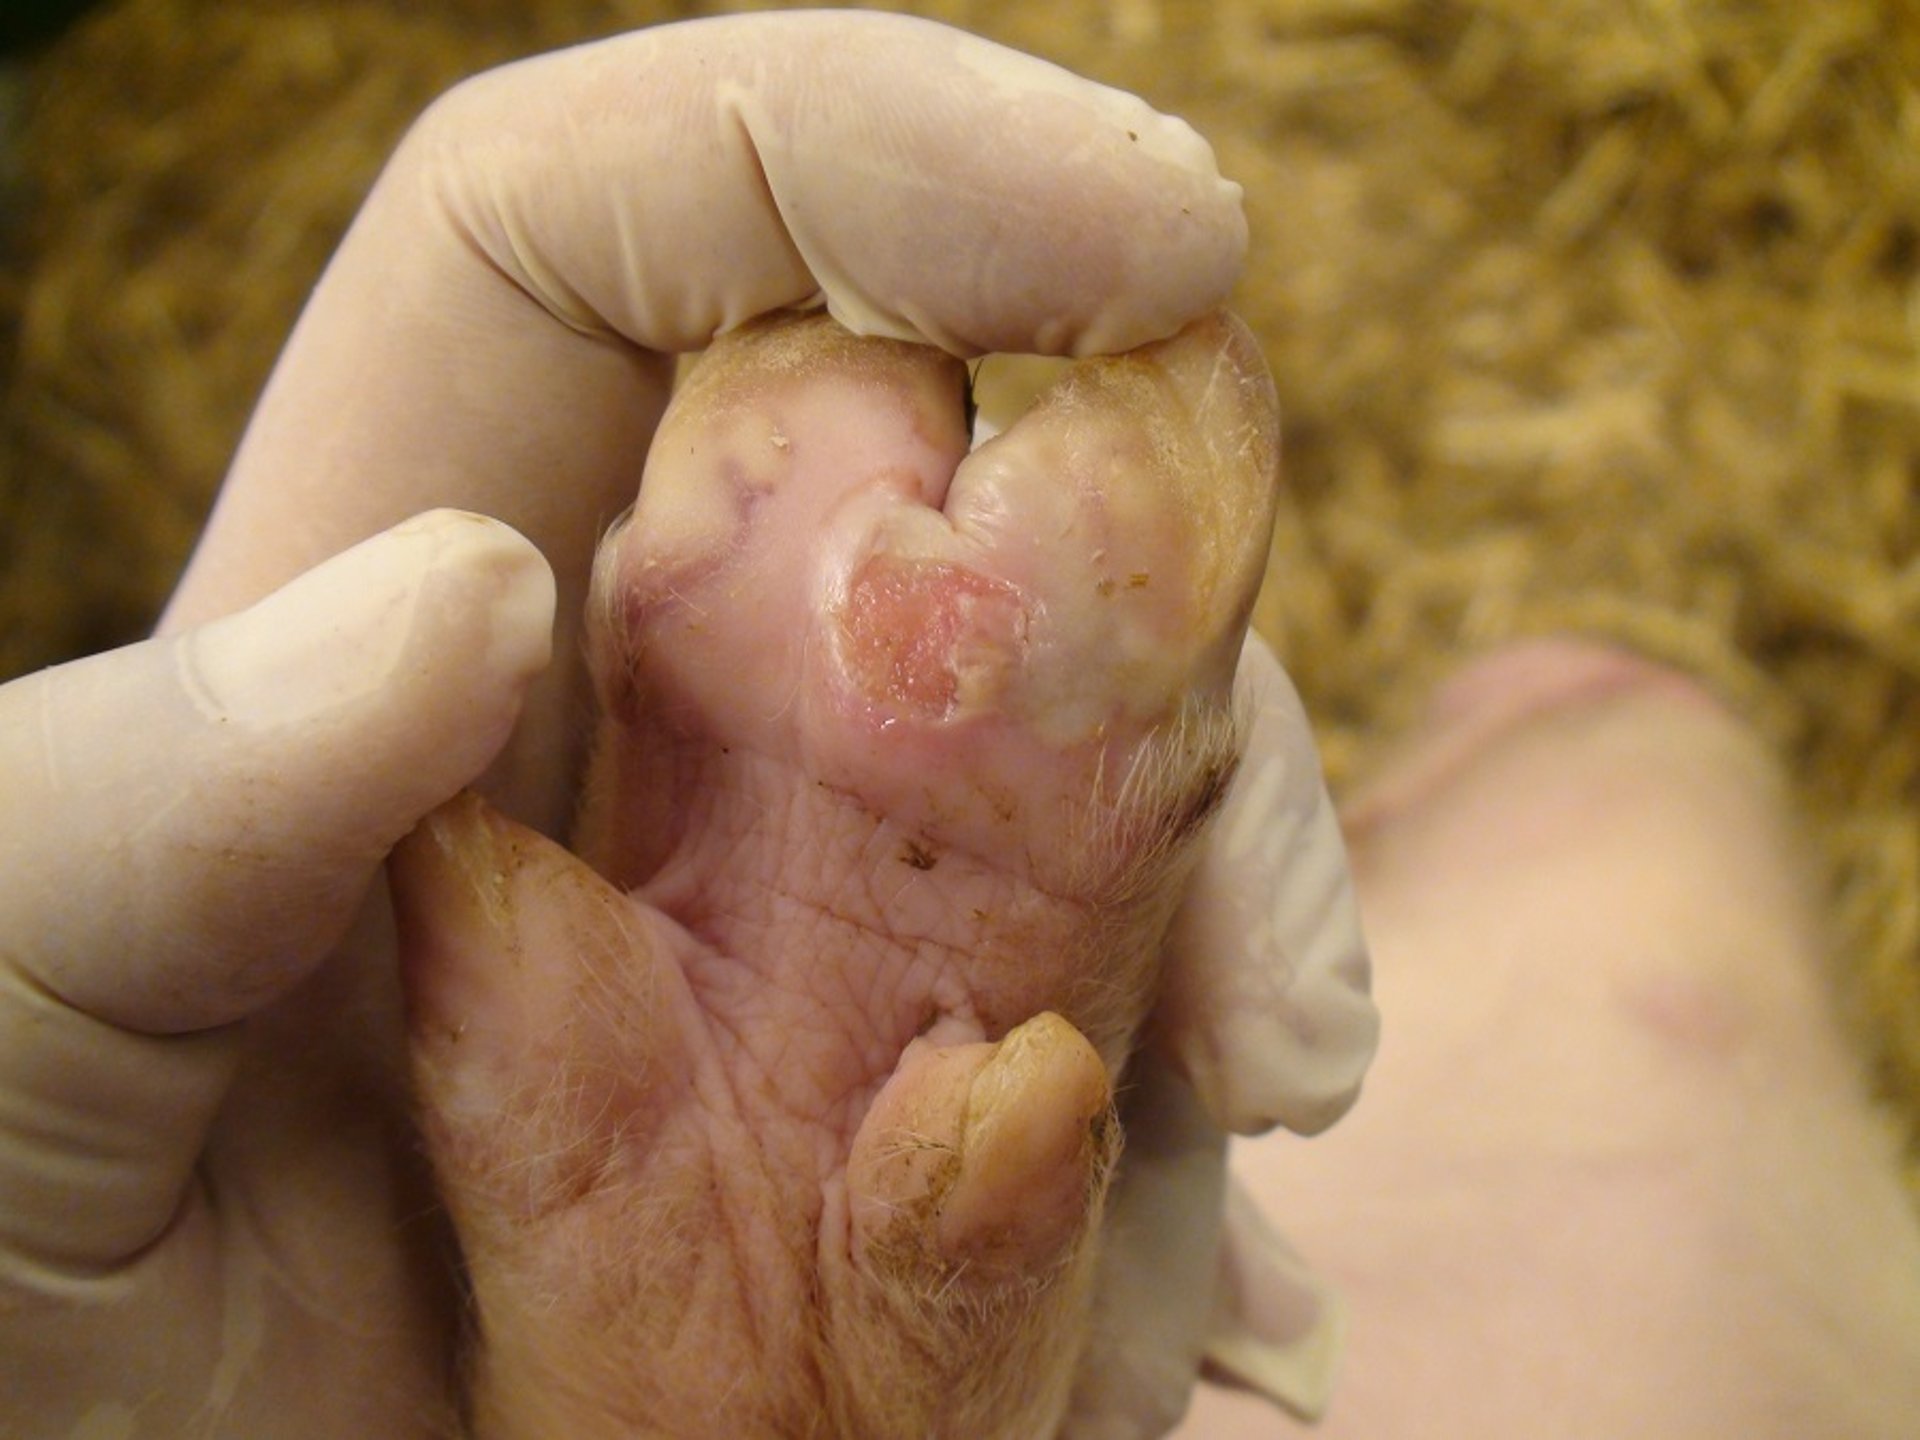 Foot lesion with ruptured vesicles, pig